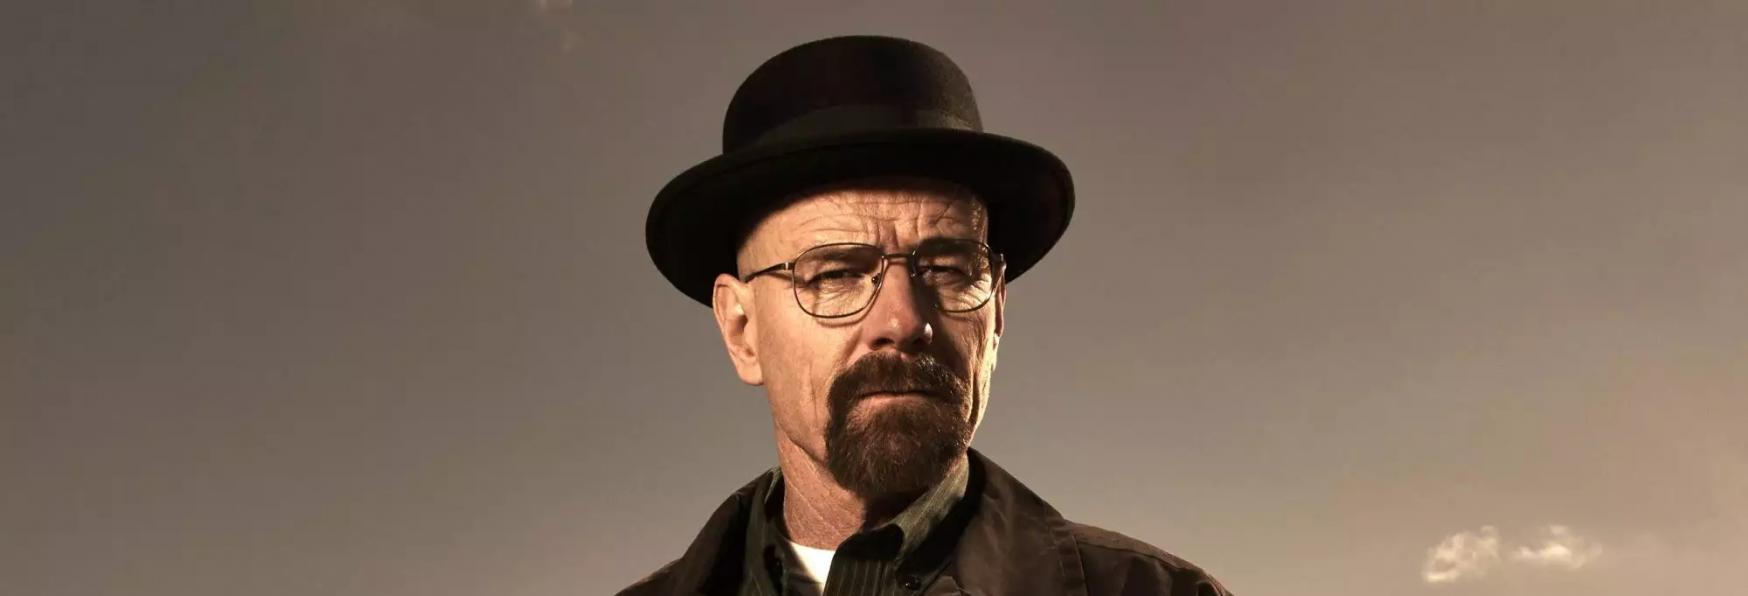 Breaking Bad: Bryan Cranston reveals his wife's reaction to the script